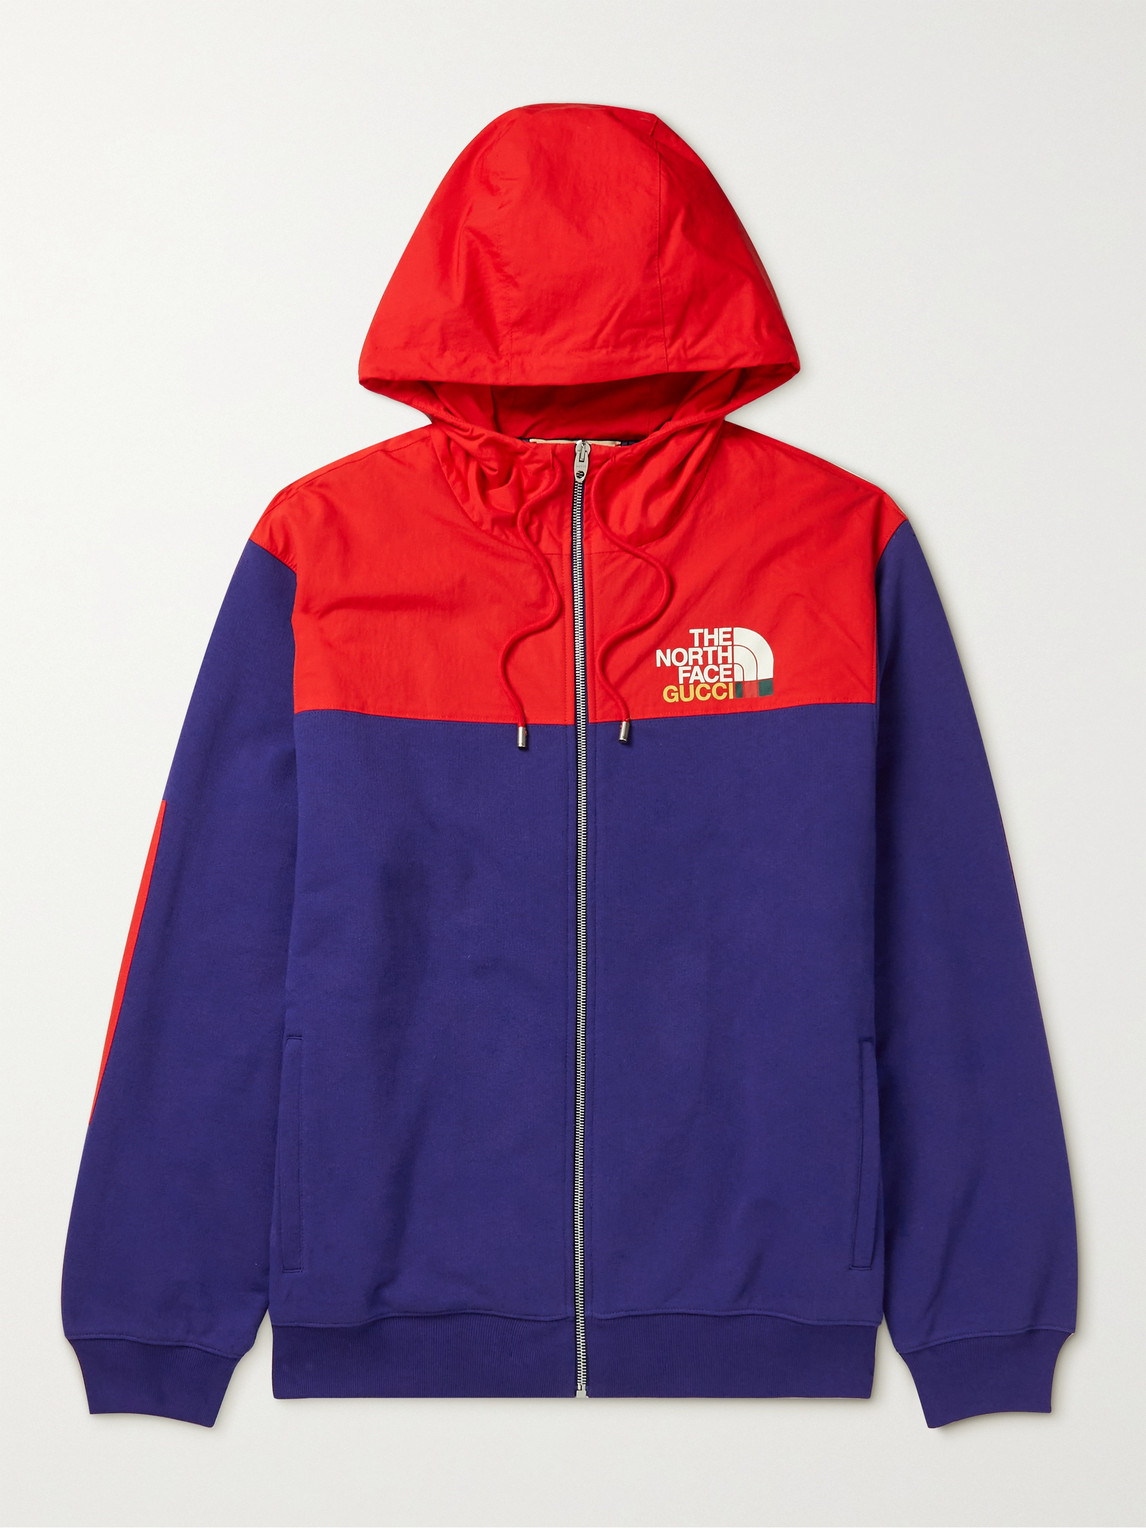 GUCCI THE NORTH FACE SHELL-TRIMMED LOGO-PRINT COTTON-JERSEY ZIP-UP HOODIE